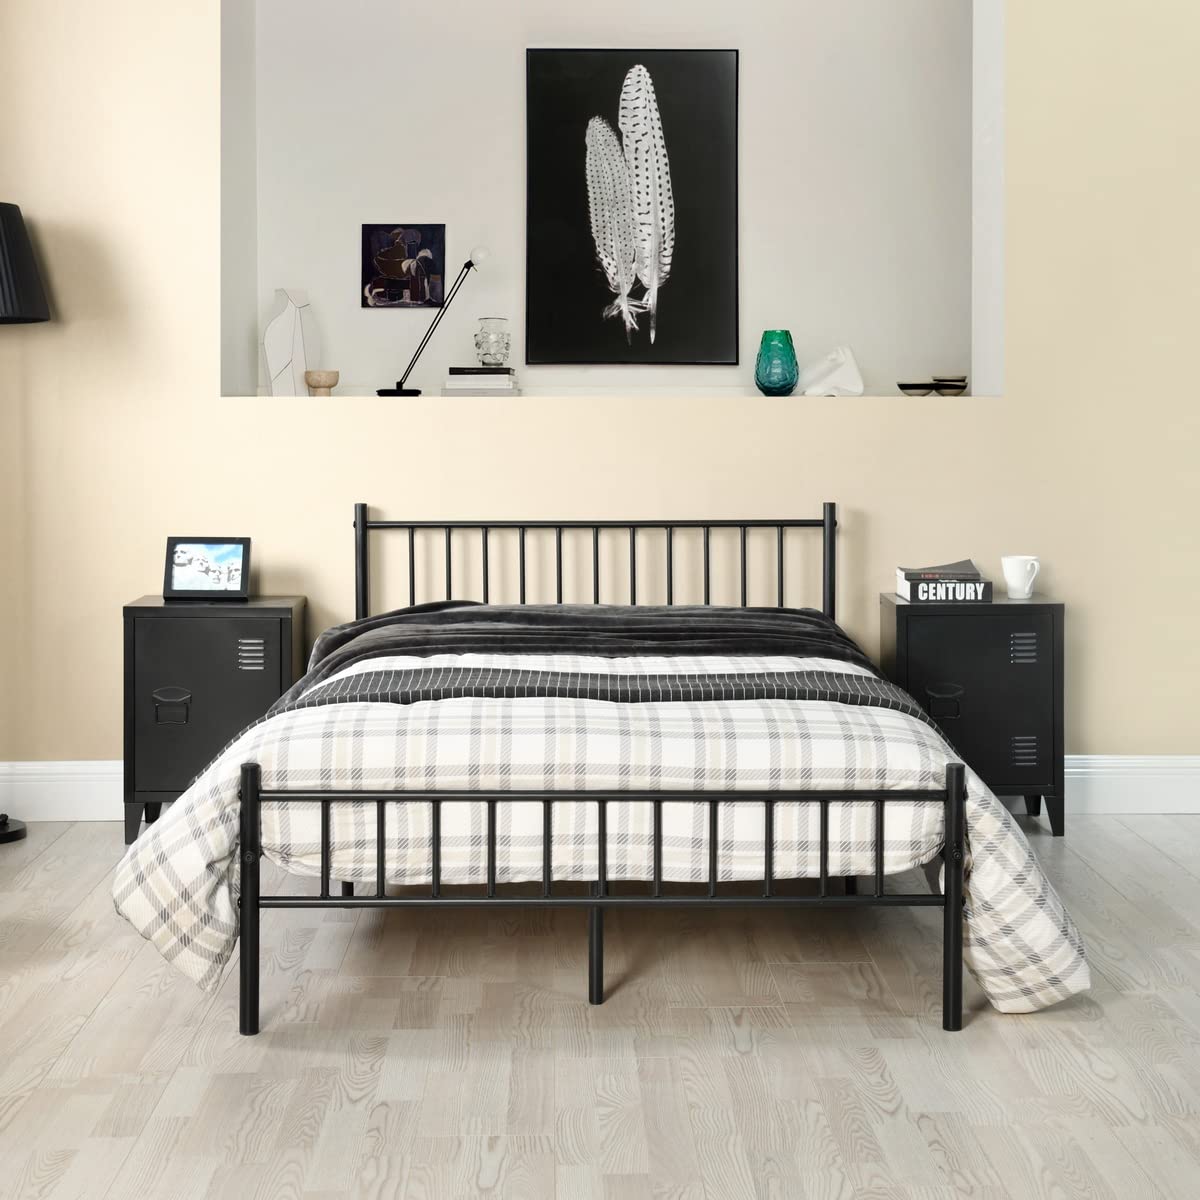 ReseeZac Small Double Bed Frame